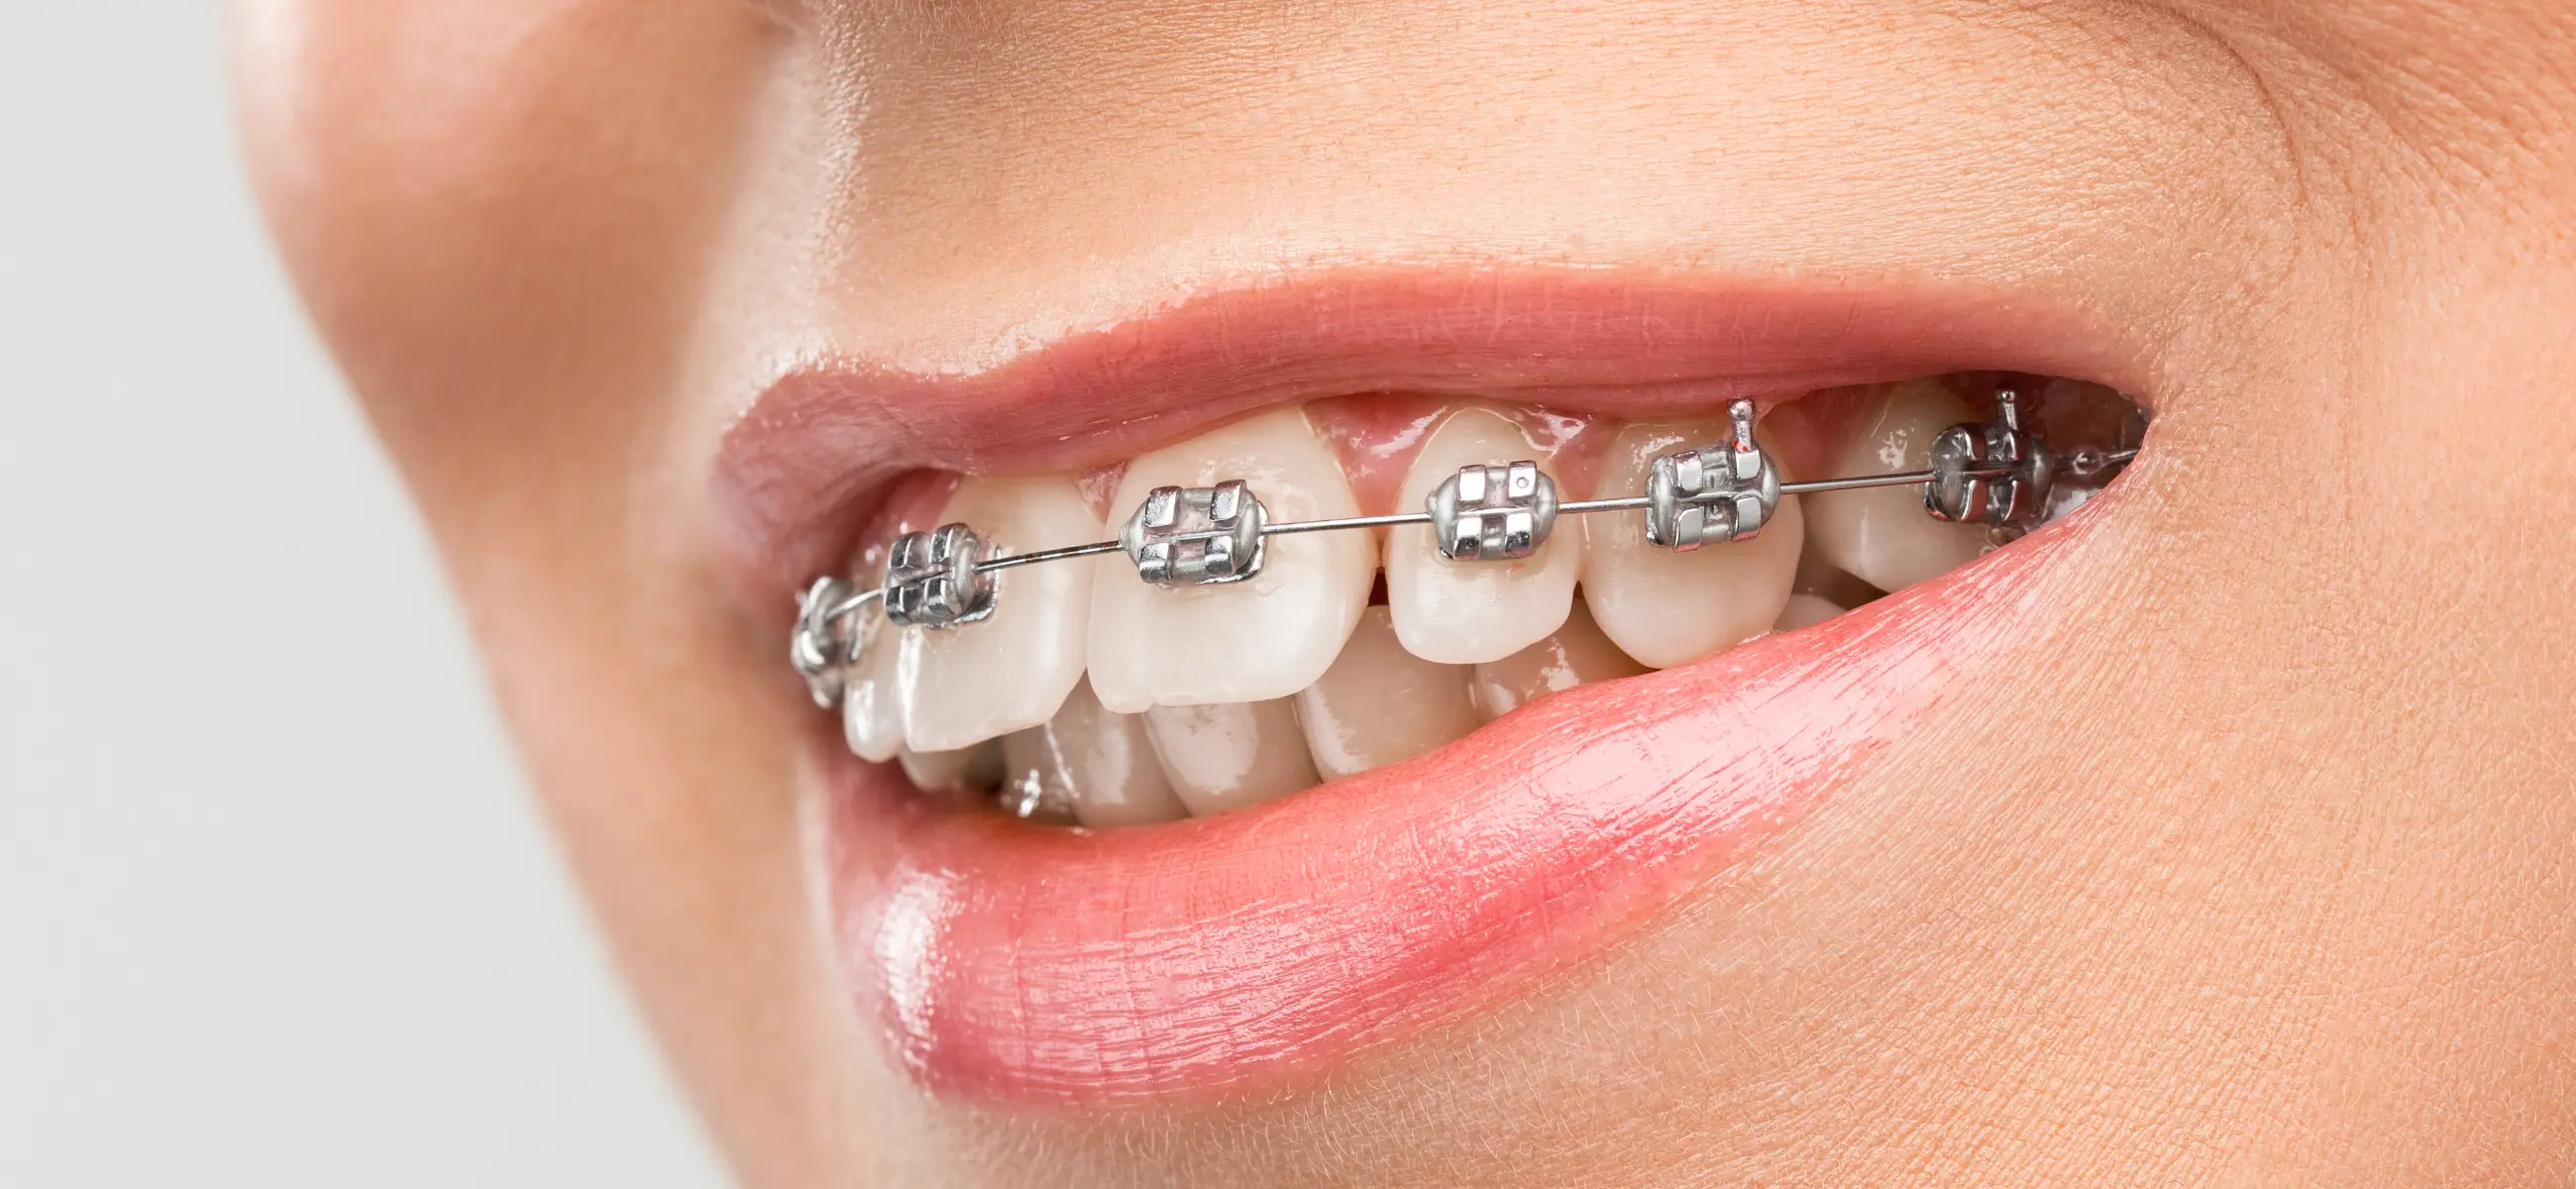 Teeth whitening methods for people with braces